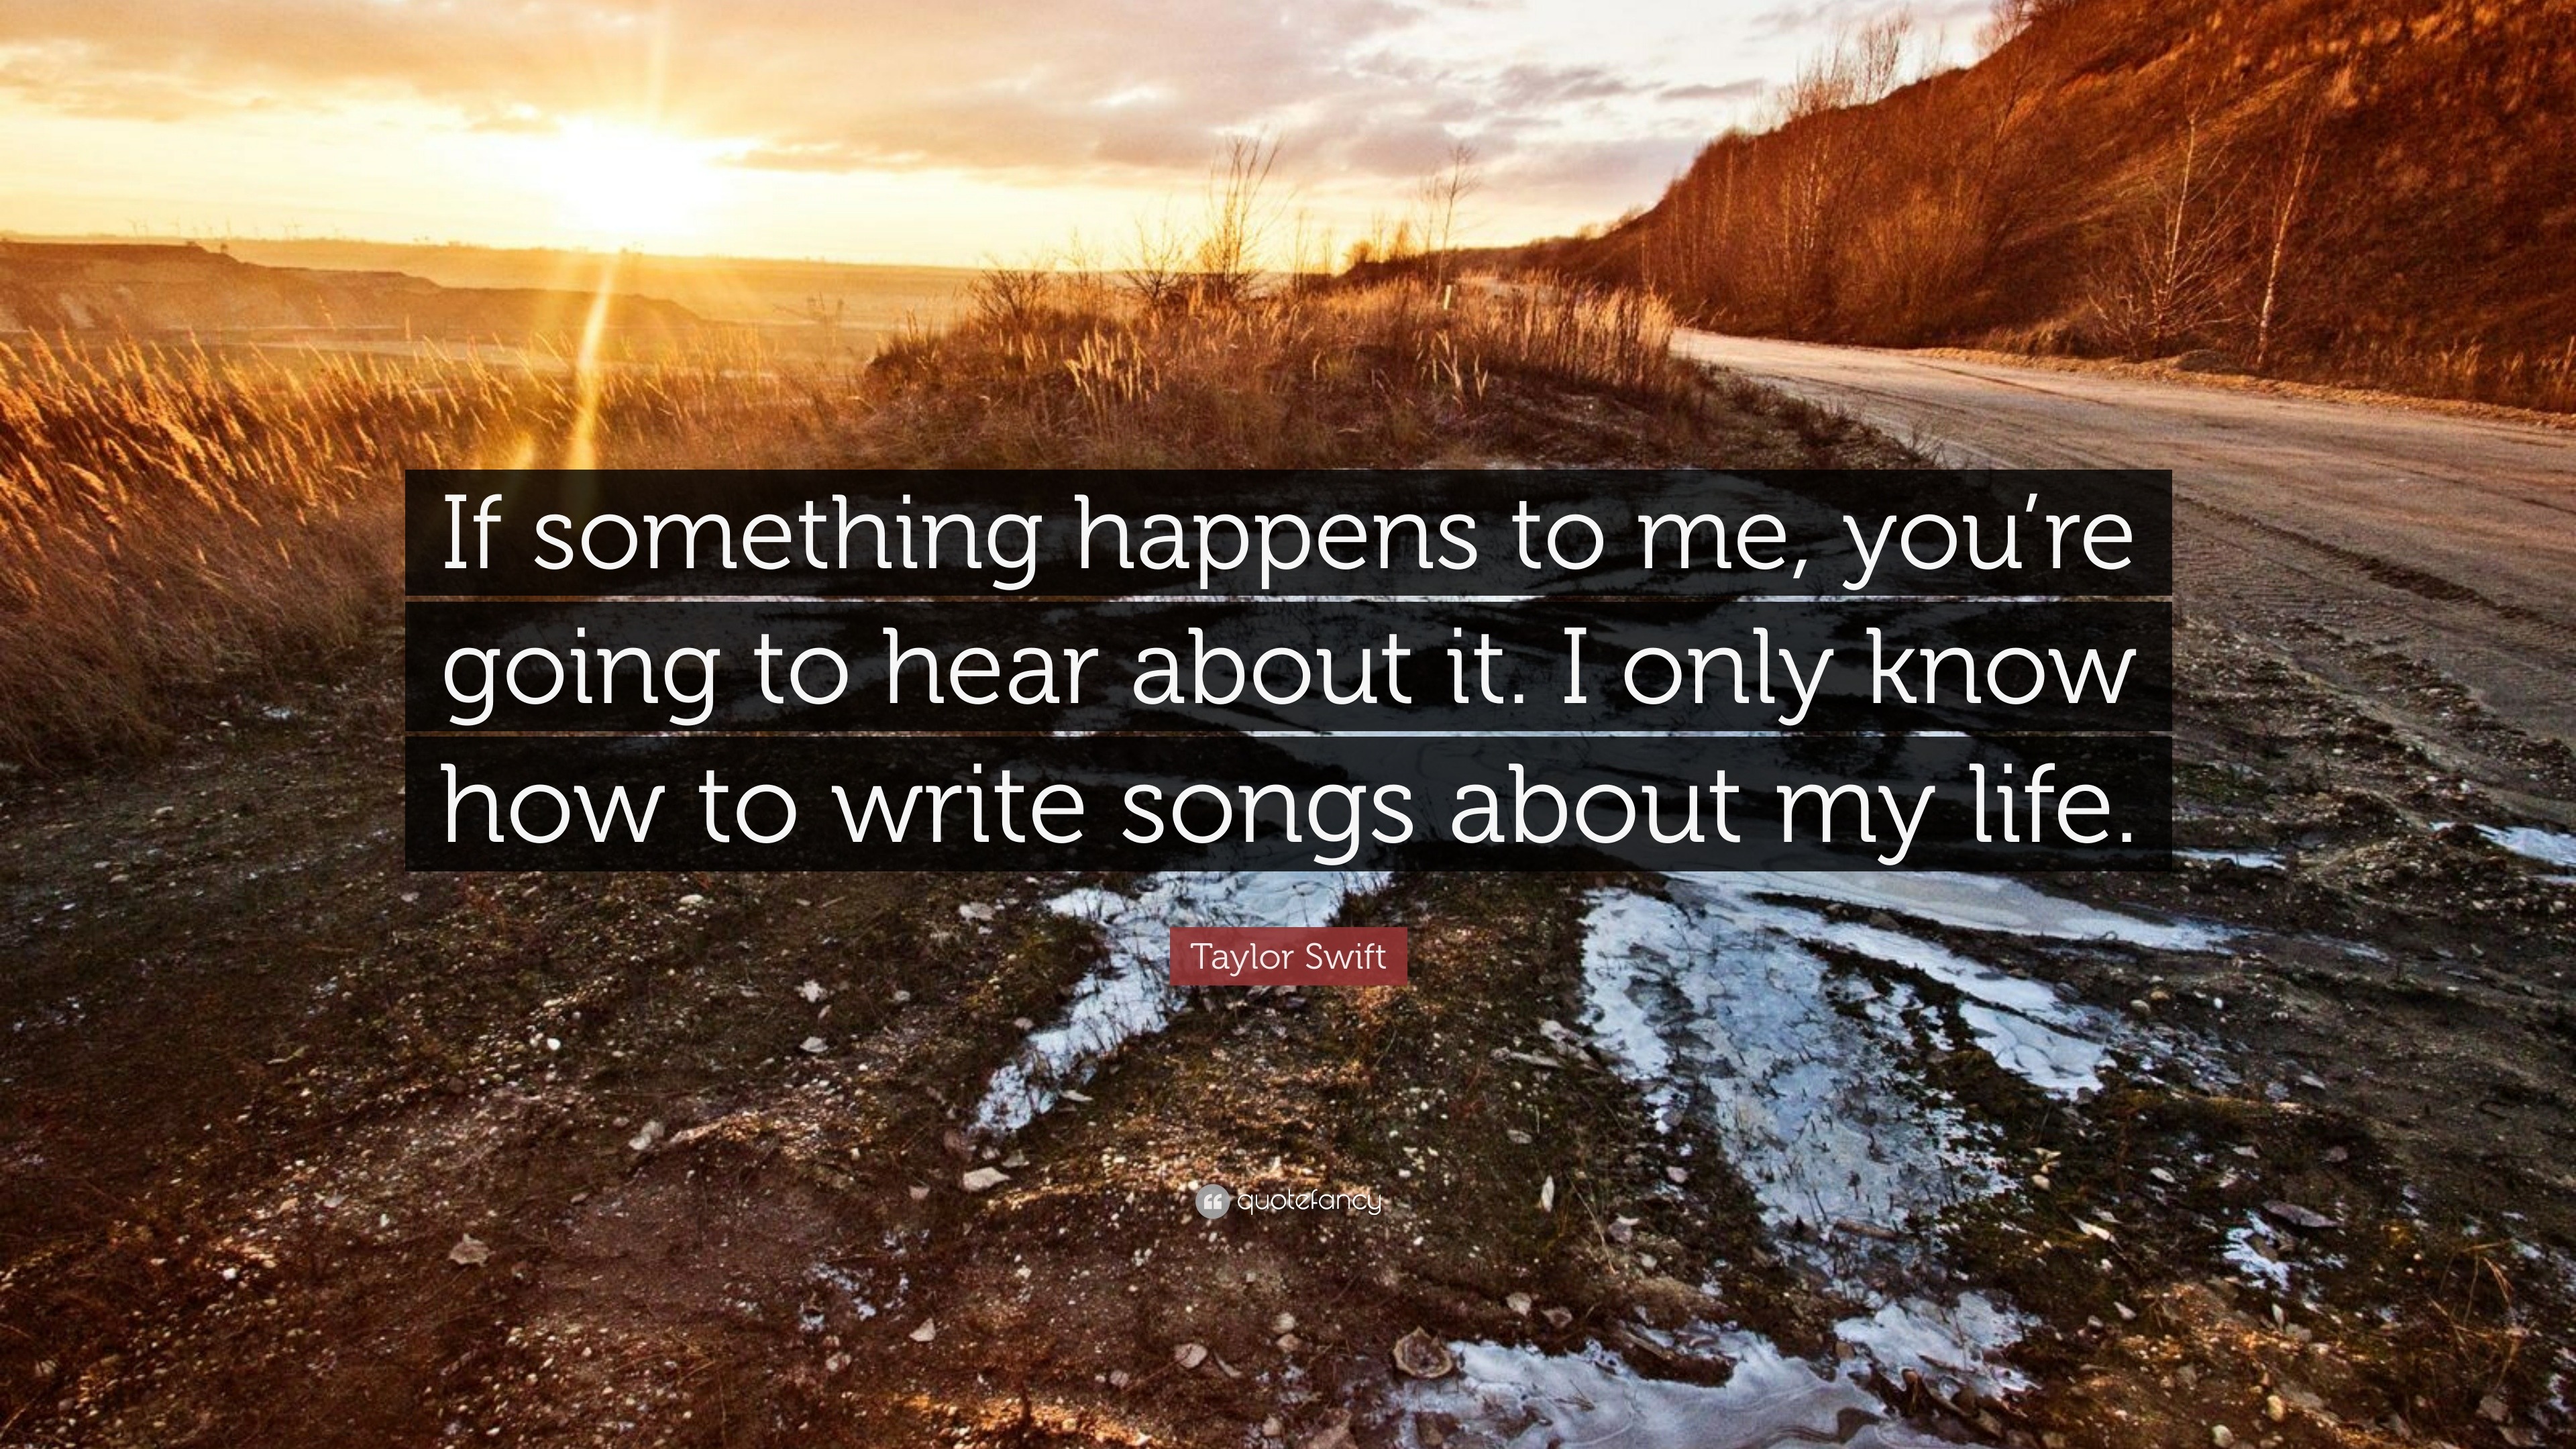 https://quotefancy.com/media/wallpaper/3840x2160/1860539-Taylor-Swift-Quote-If-something-happens-to-me-you-re-going-to-hear.jpg